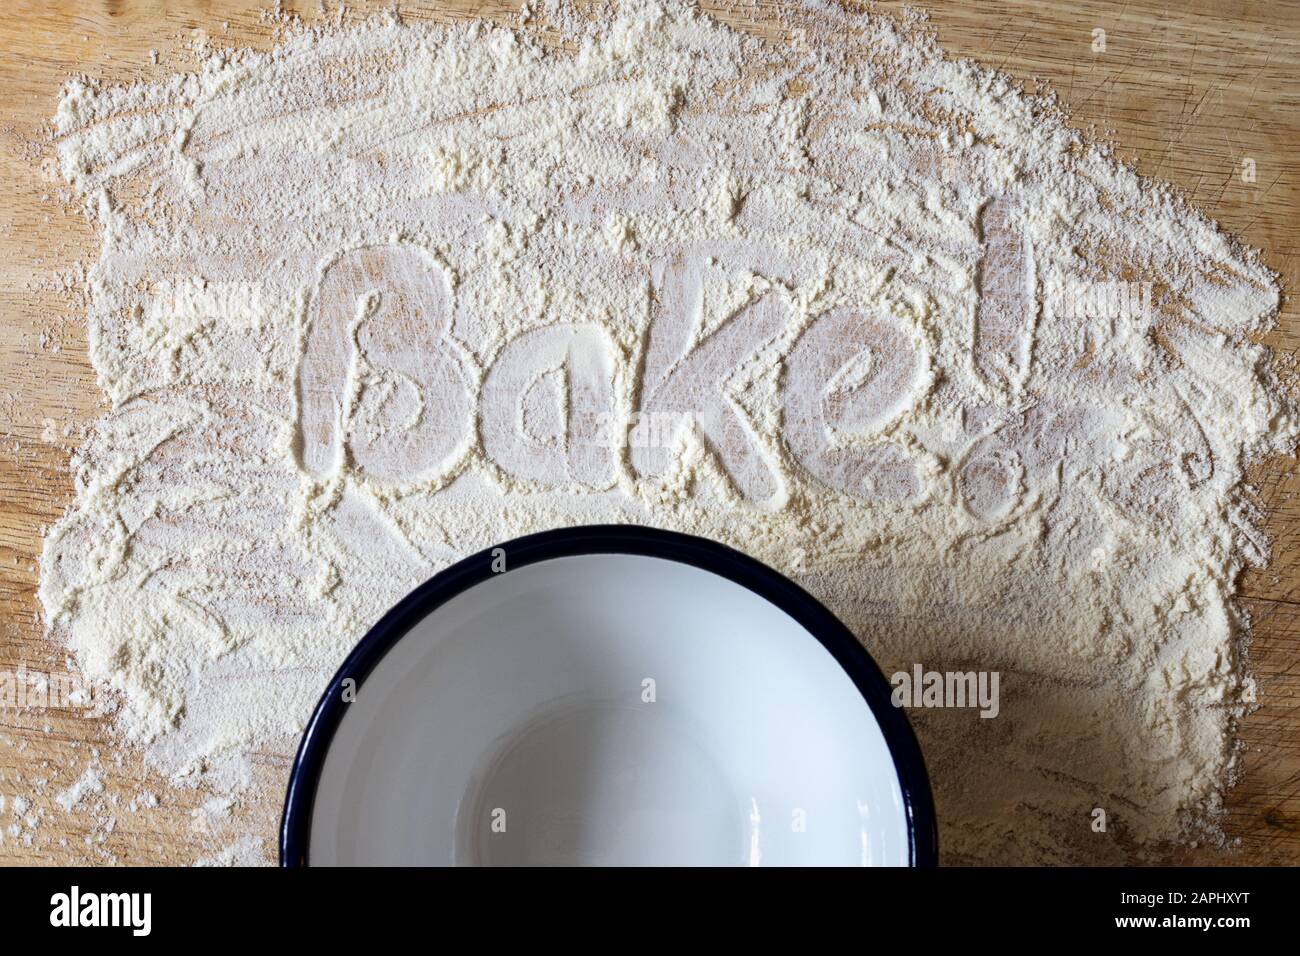 The word 'Bake!' handwritten in scattered flour on a wooden chopping board with empty enamel bowl below. Overhead shot. Stock Photo